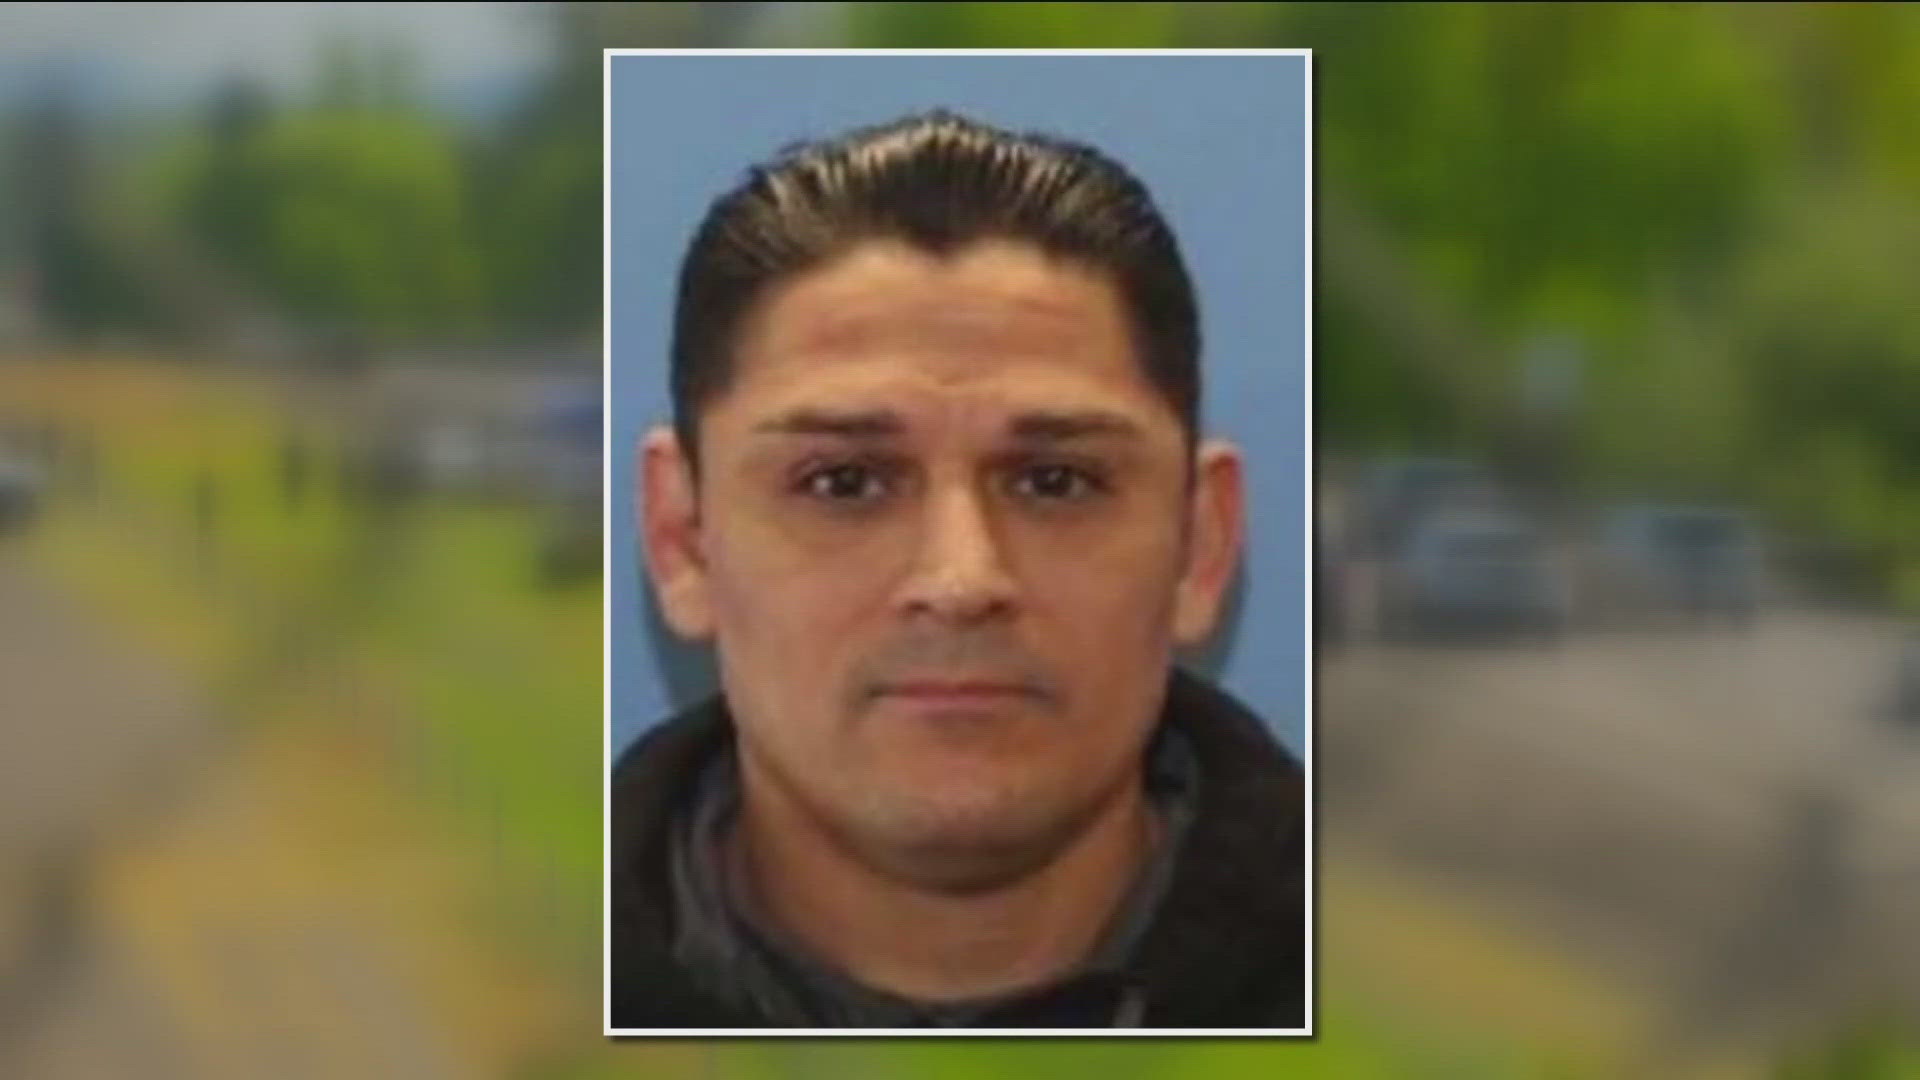 Elias Huizar is suspected of killing two women in Washington and abducting a 1-year-old, sparking a manhunt. The child is now being cared for.